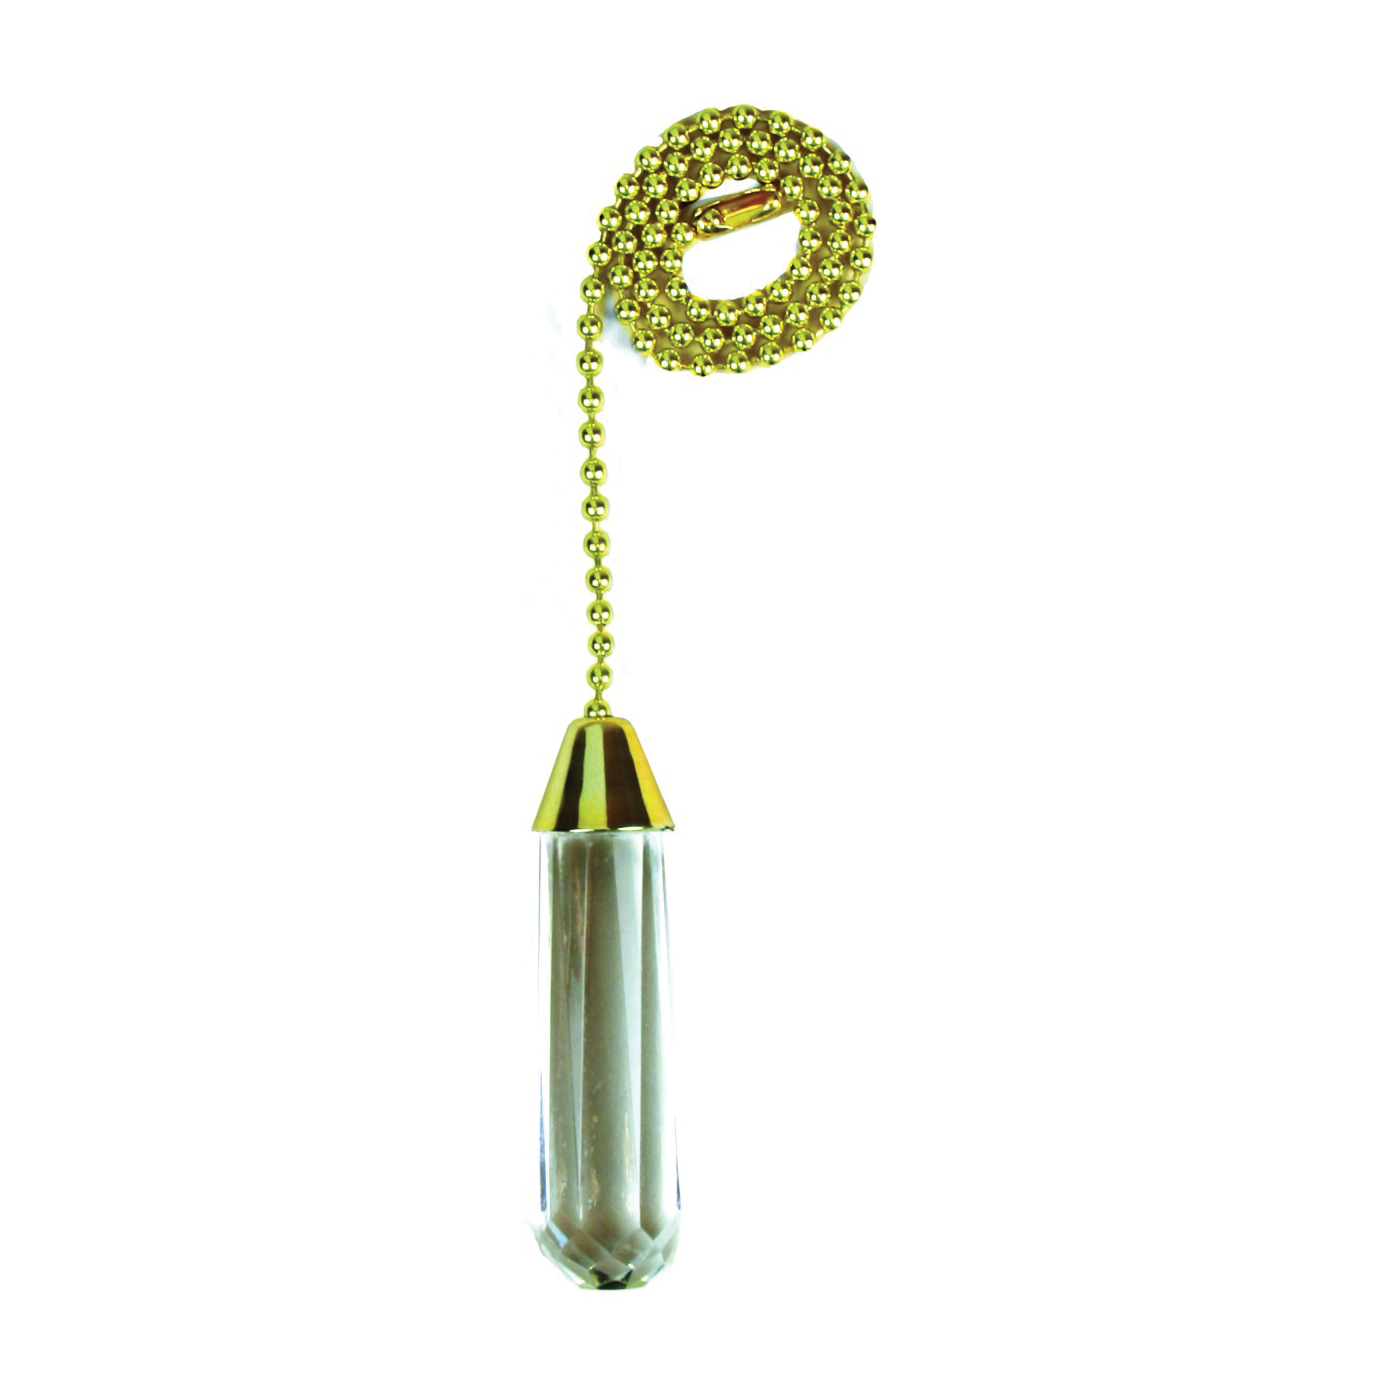 Jandorf 60316 Acrylic Cylinder Pull Chain, 12 in L Chain, Solid Brass - 1